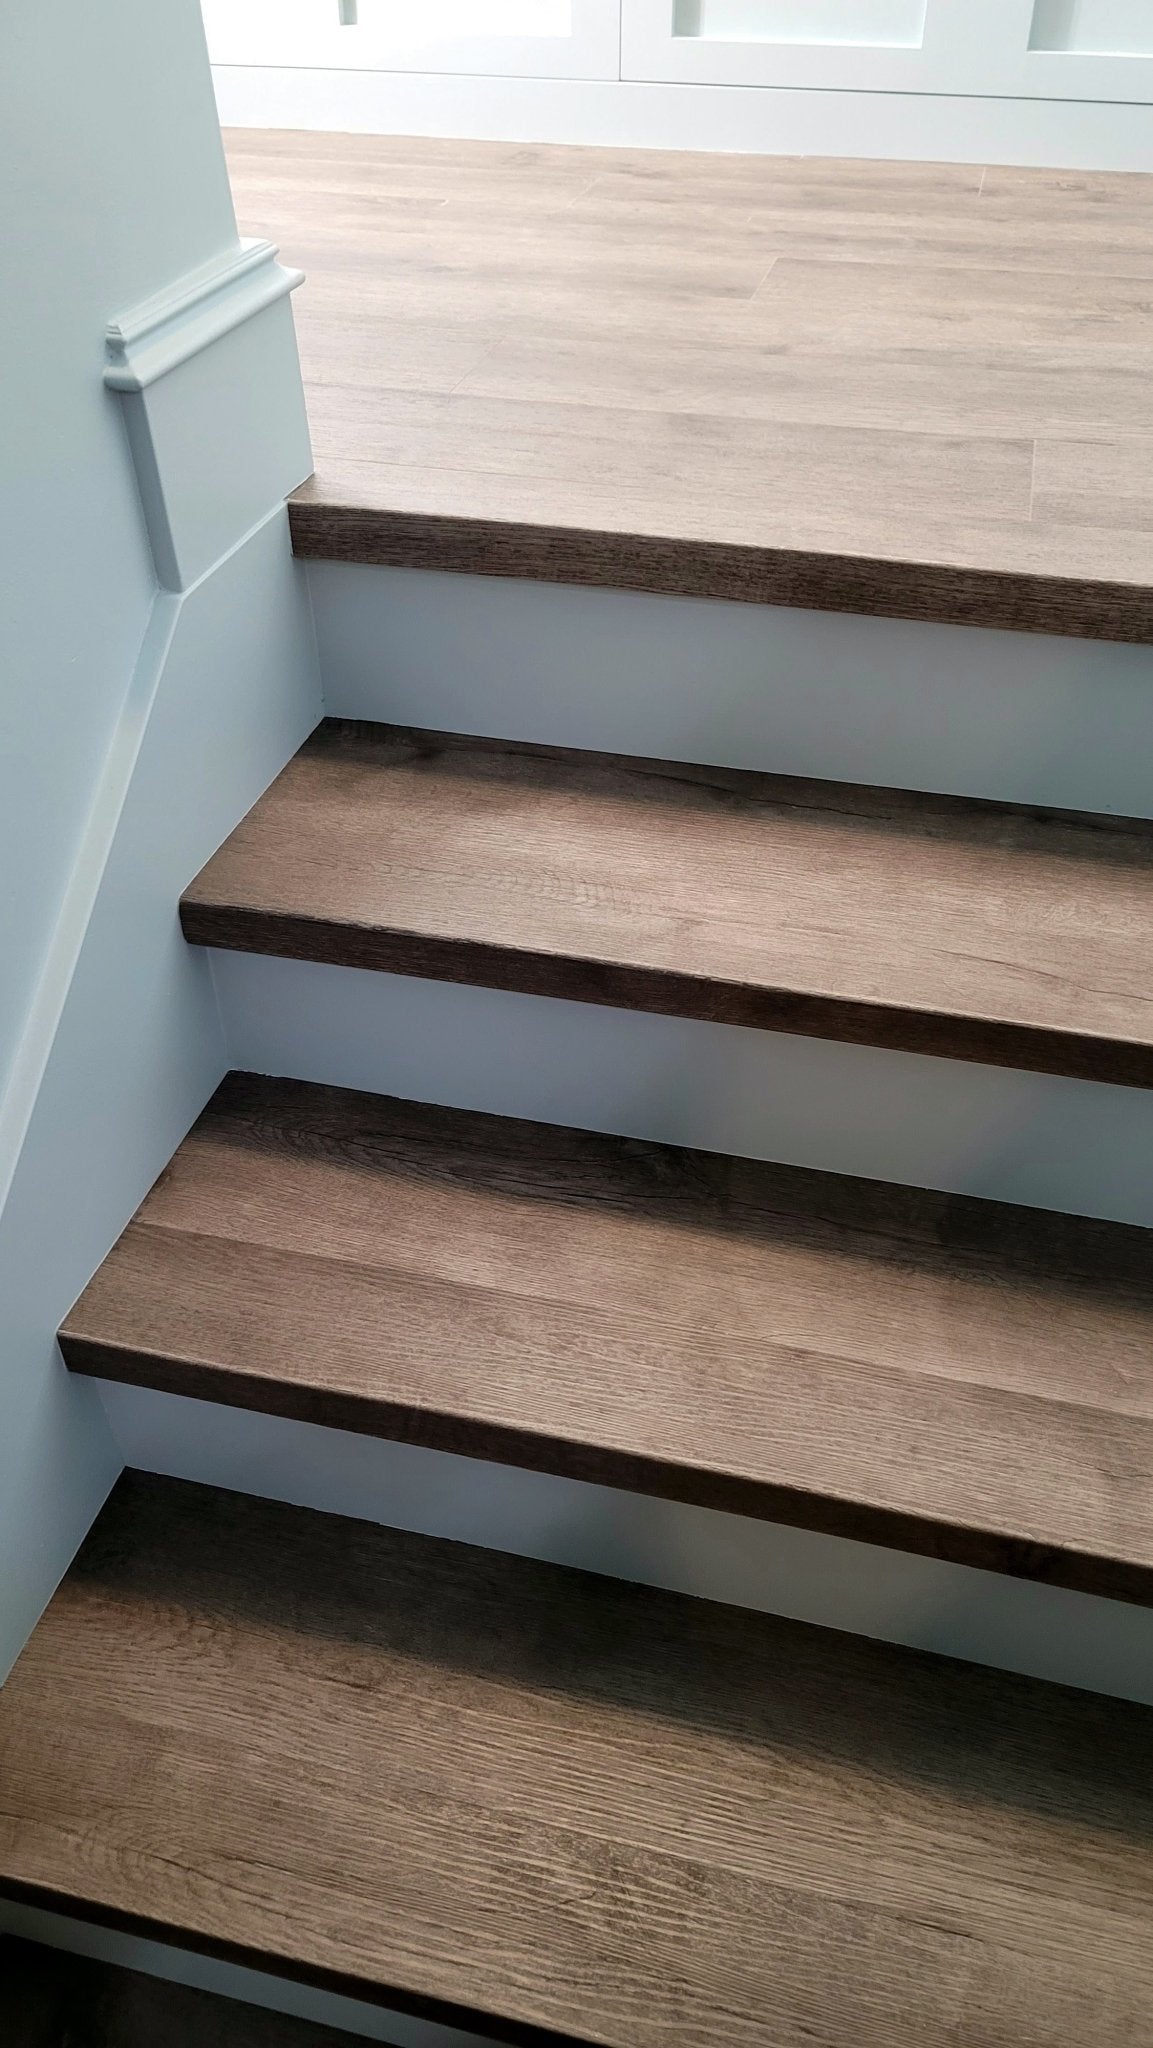 Stair Nosing Free Sample - Our Treads Shown on Stairs - Salty Custom Vinyl